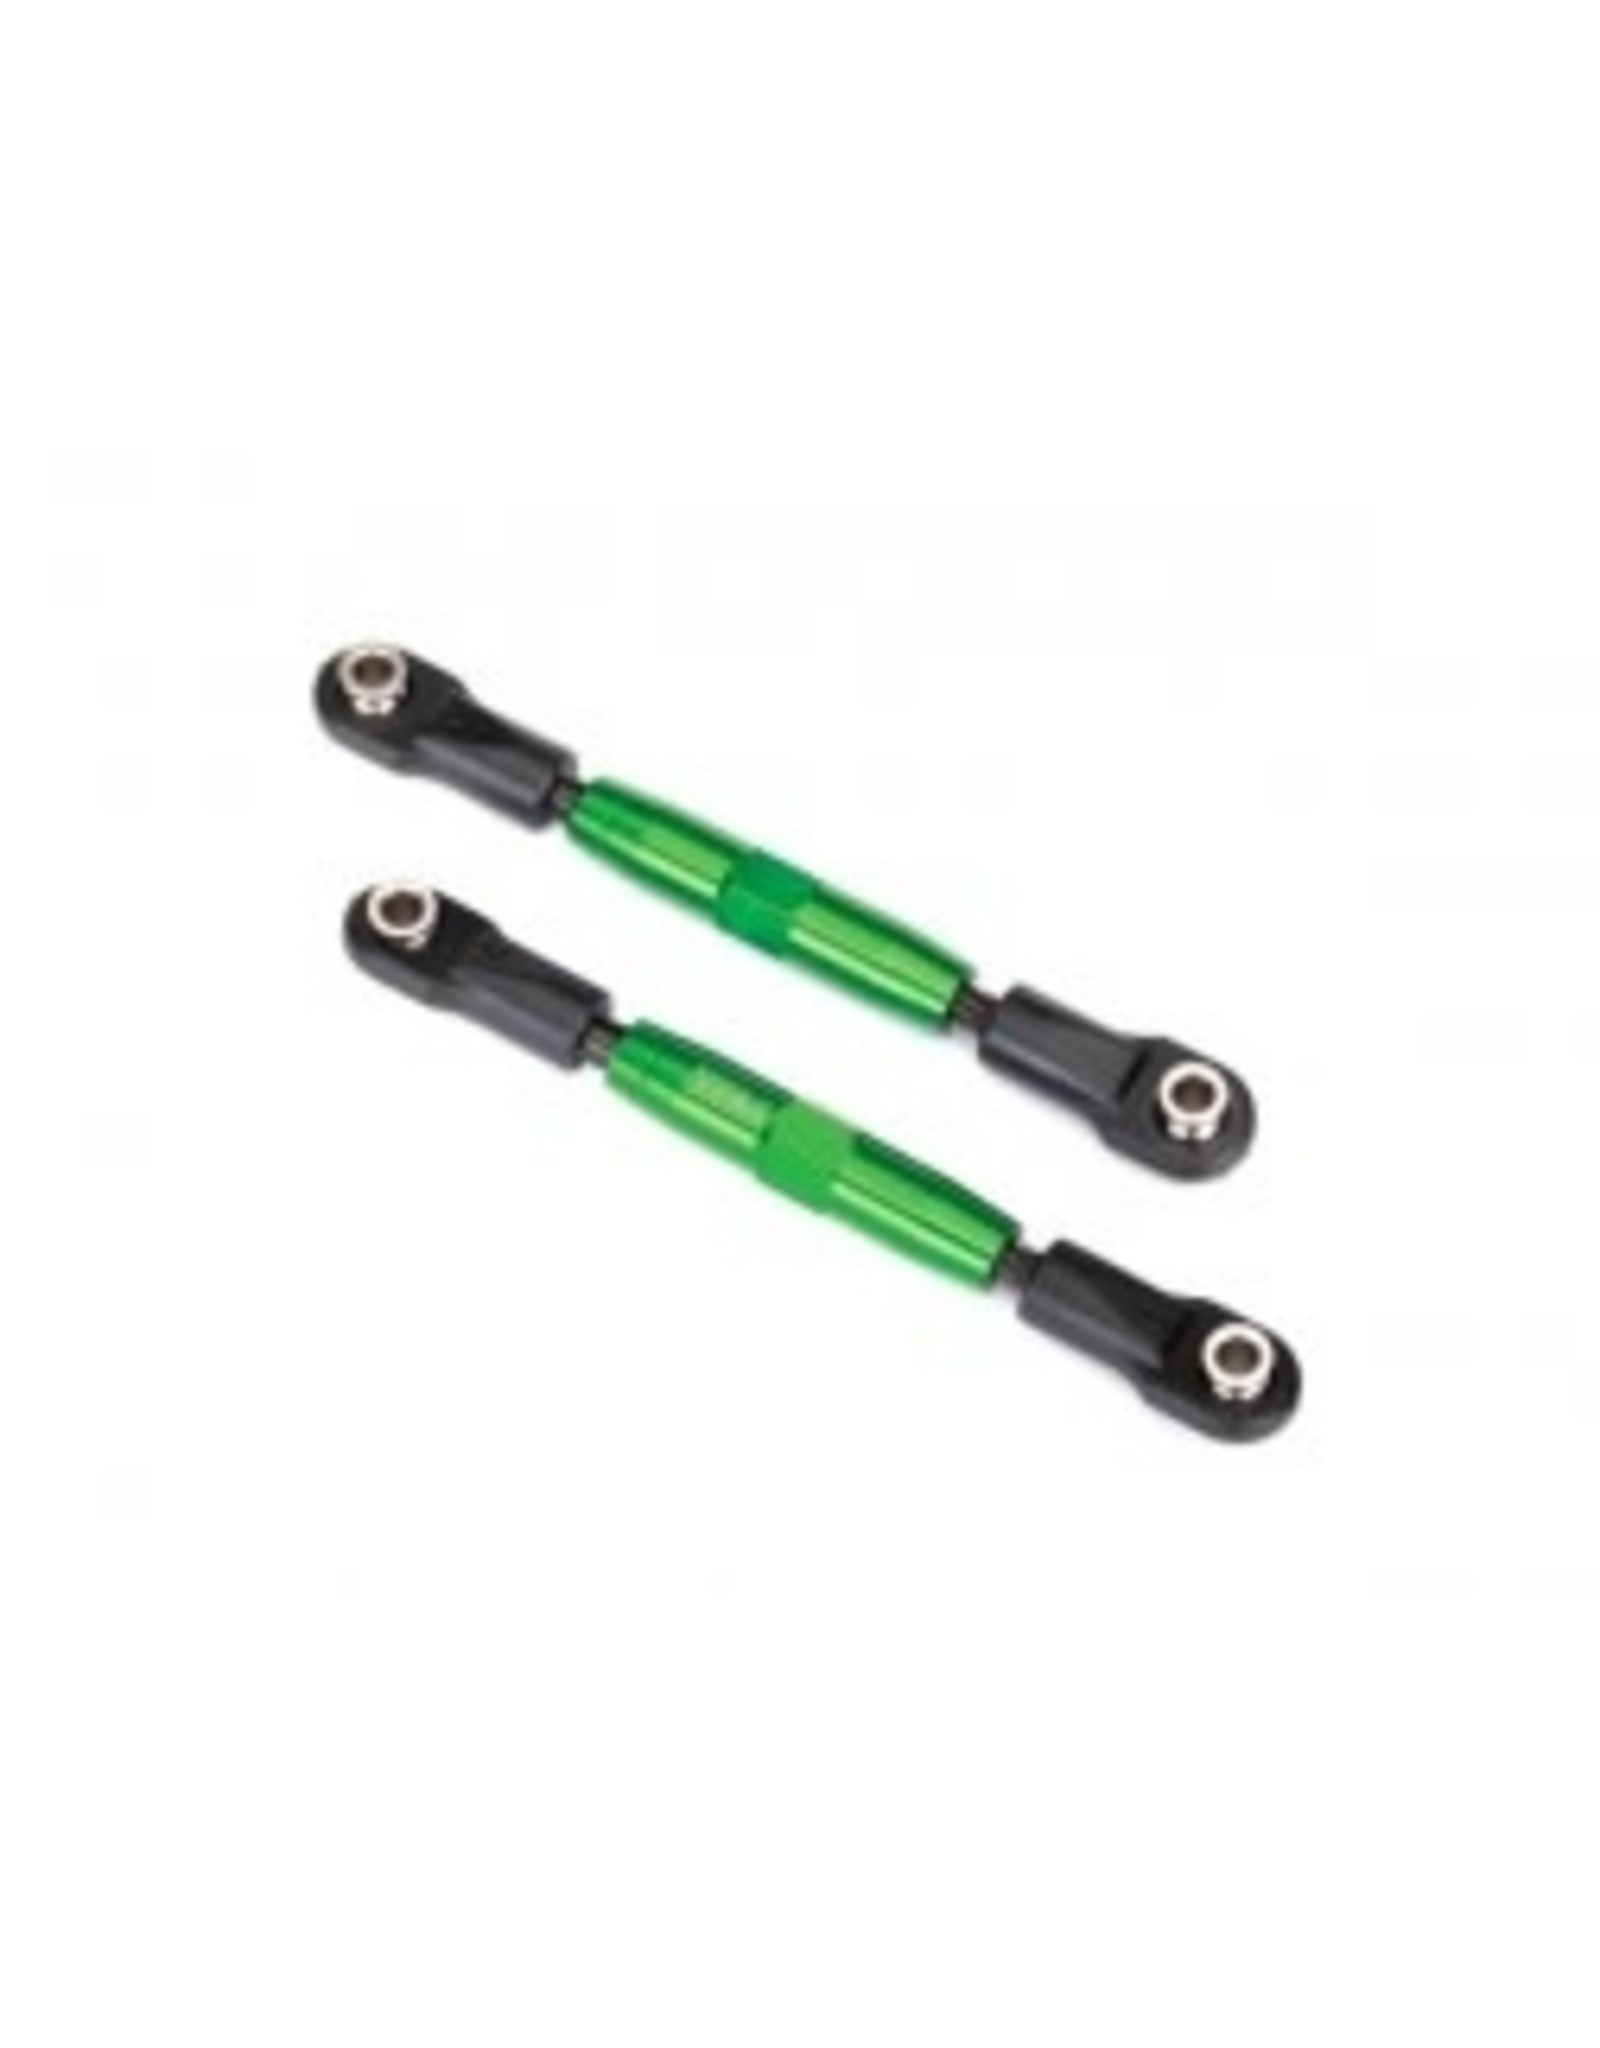 Traxxas Camber links, rear (TUBES green-anodized 7075-T6 aluminum, stronger than titanium) (73mm) (2)/ rod ends (4)/ aluminum wrench (1) (#2579 3x15 BCS (4) required for installation)